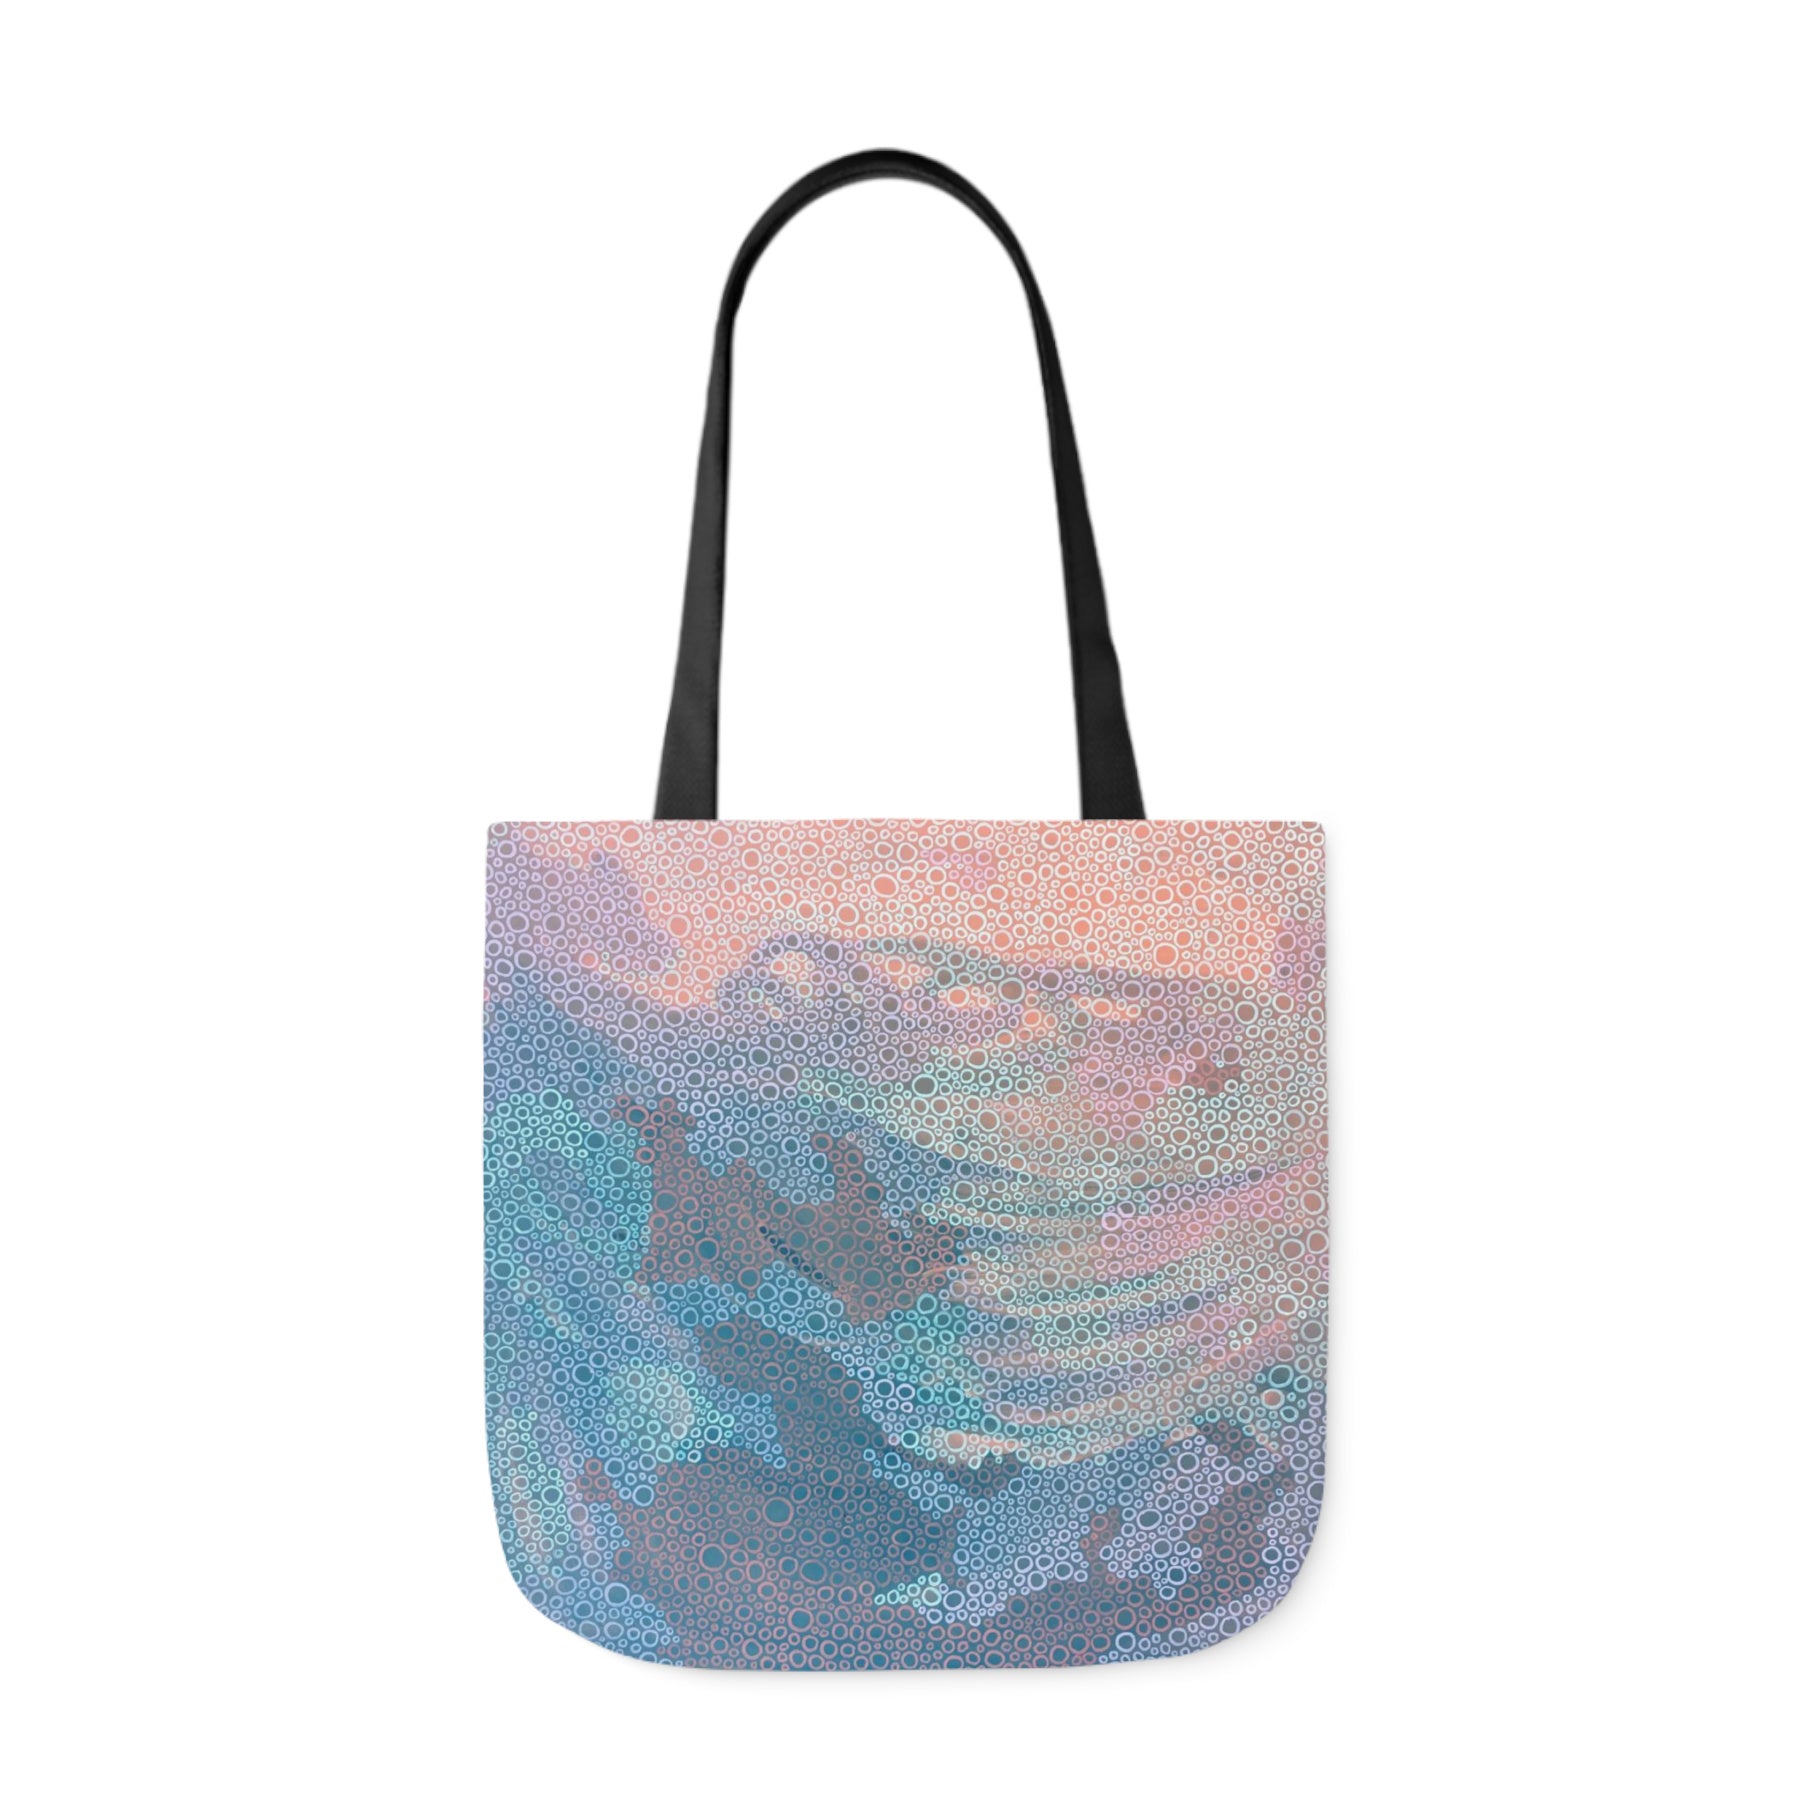 tote bag with abstract painting design in soft pinks, corals, and greys that was inspired by the ocean